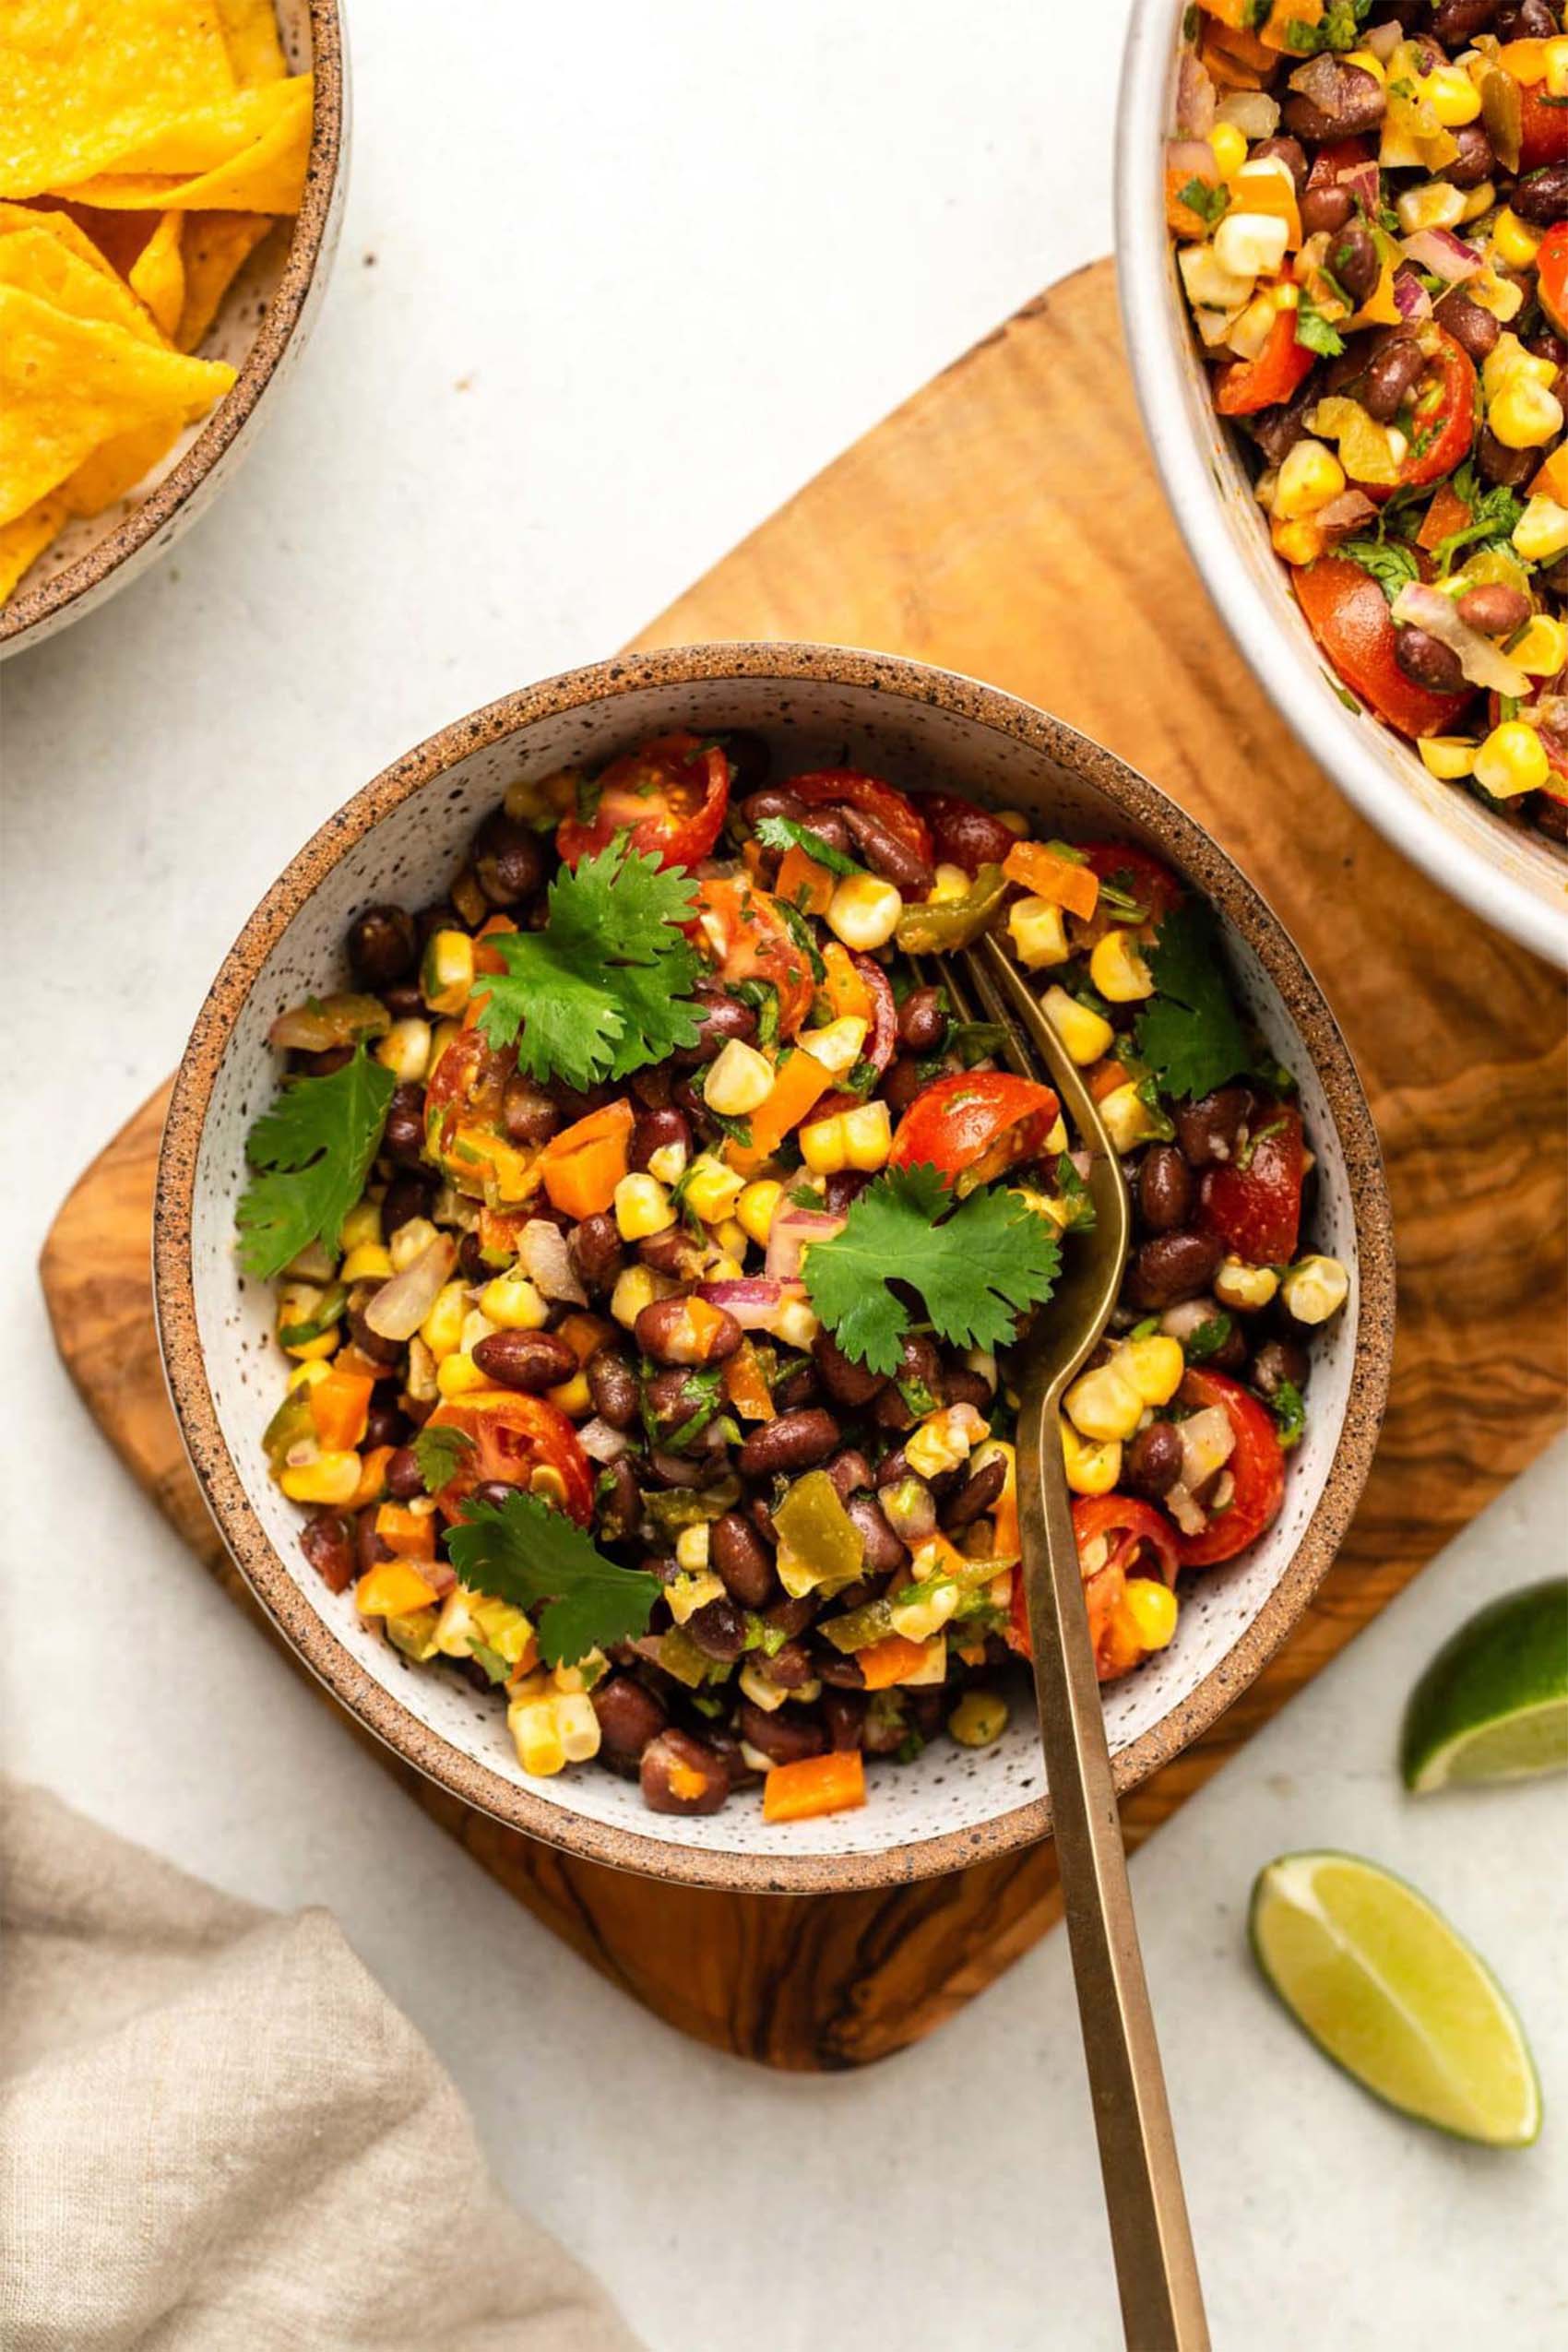 a bowl of corn, veggies and black beans topped with fresh herbs